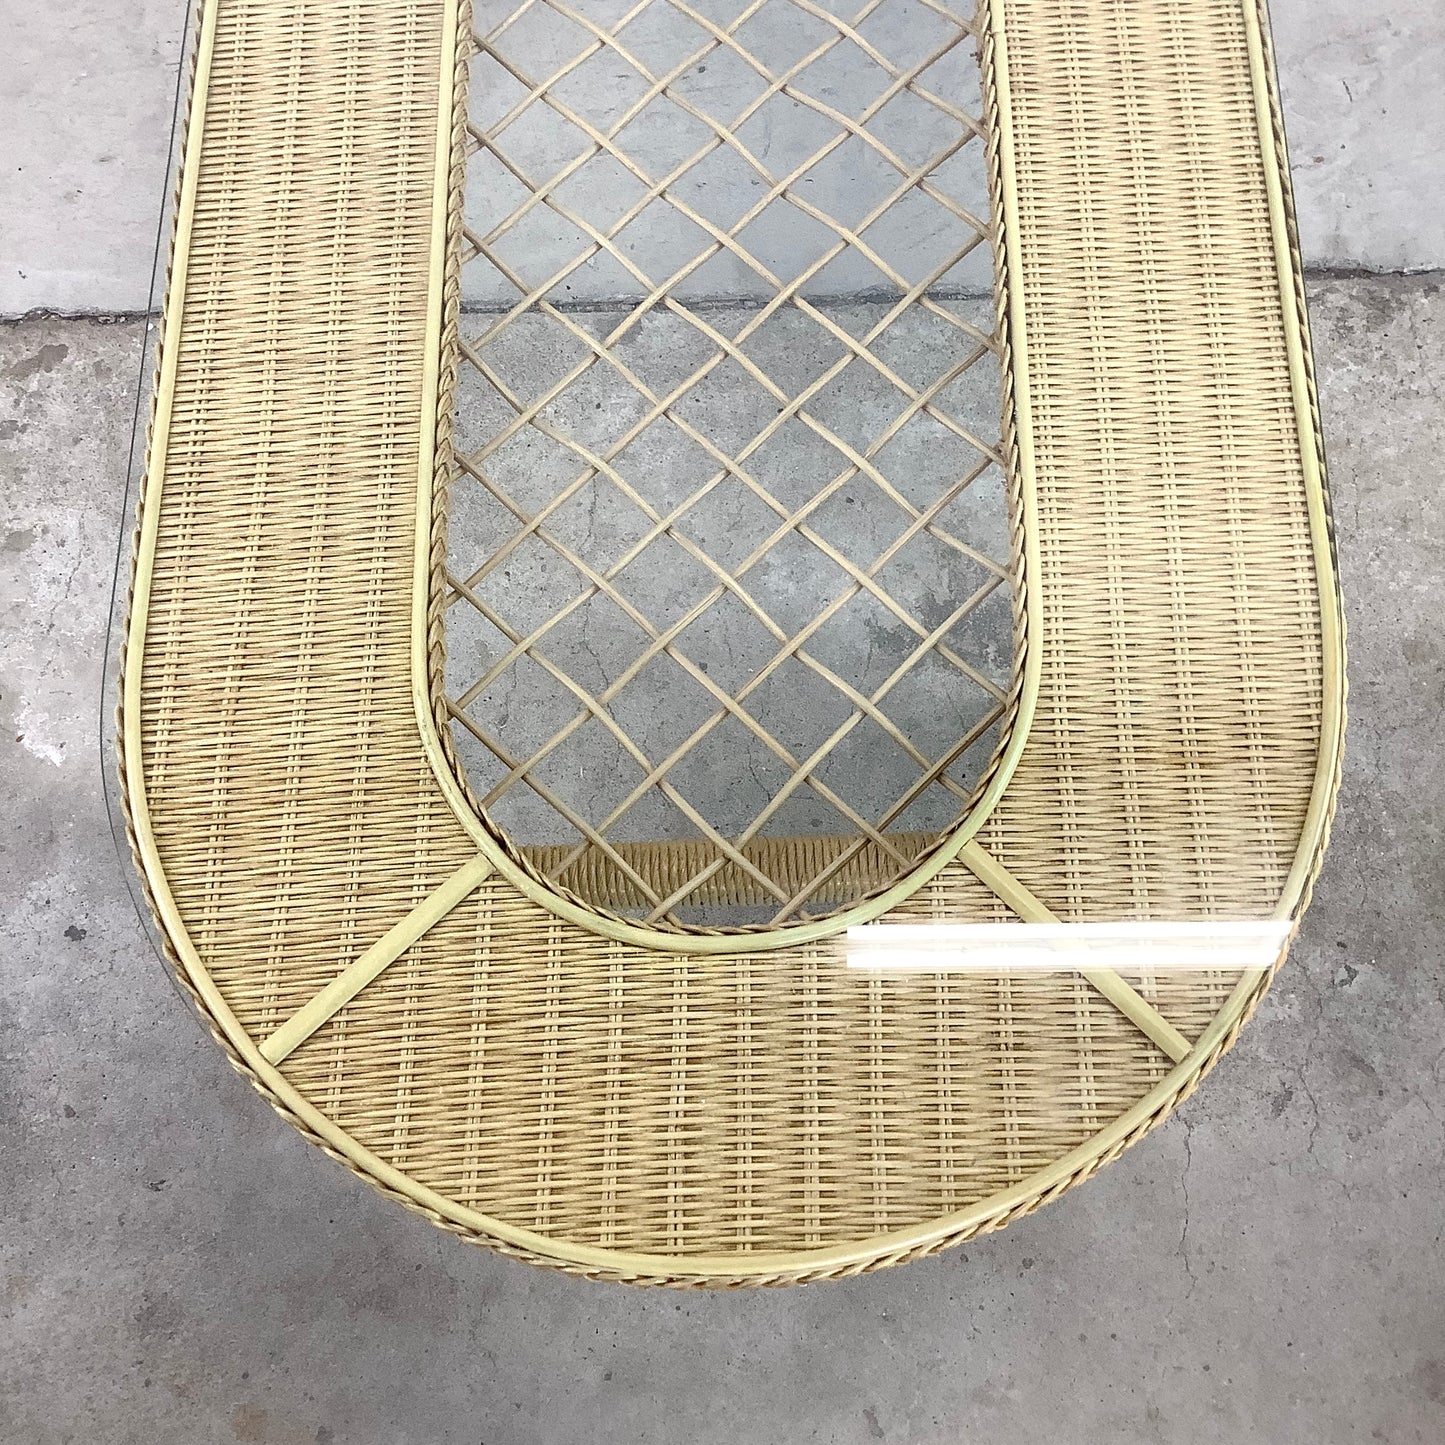 Rustic Style Oval Wicker Coffee Table With Glass Top- Henry Link Inspired